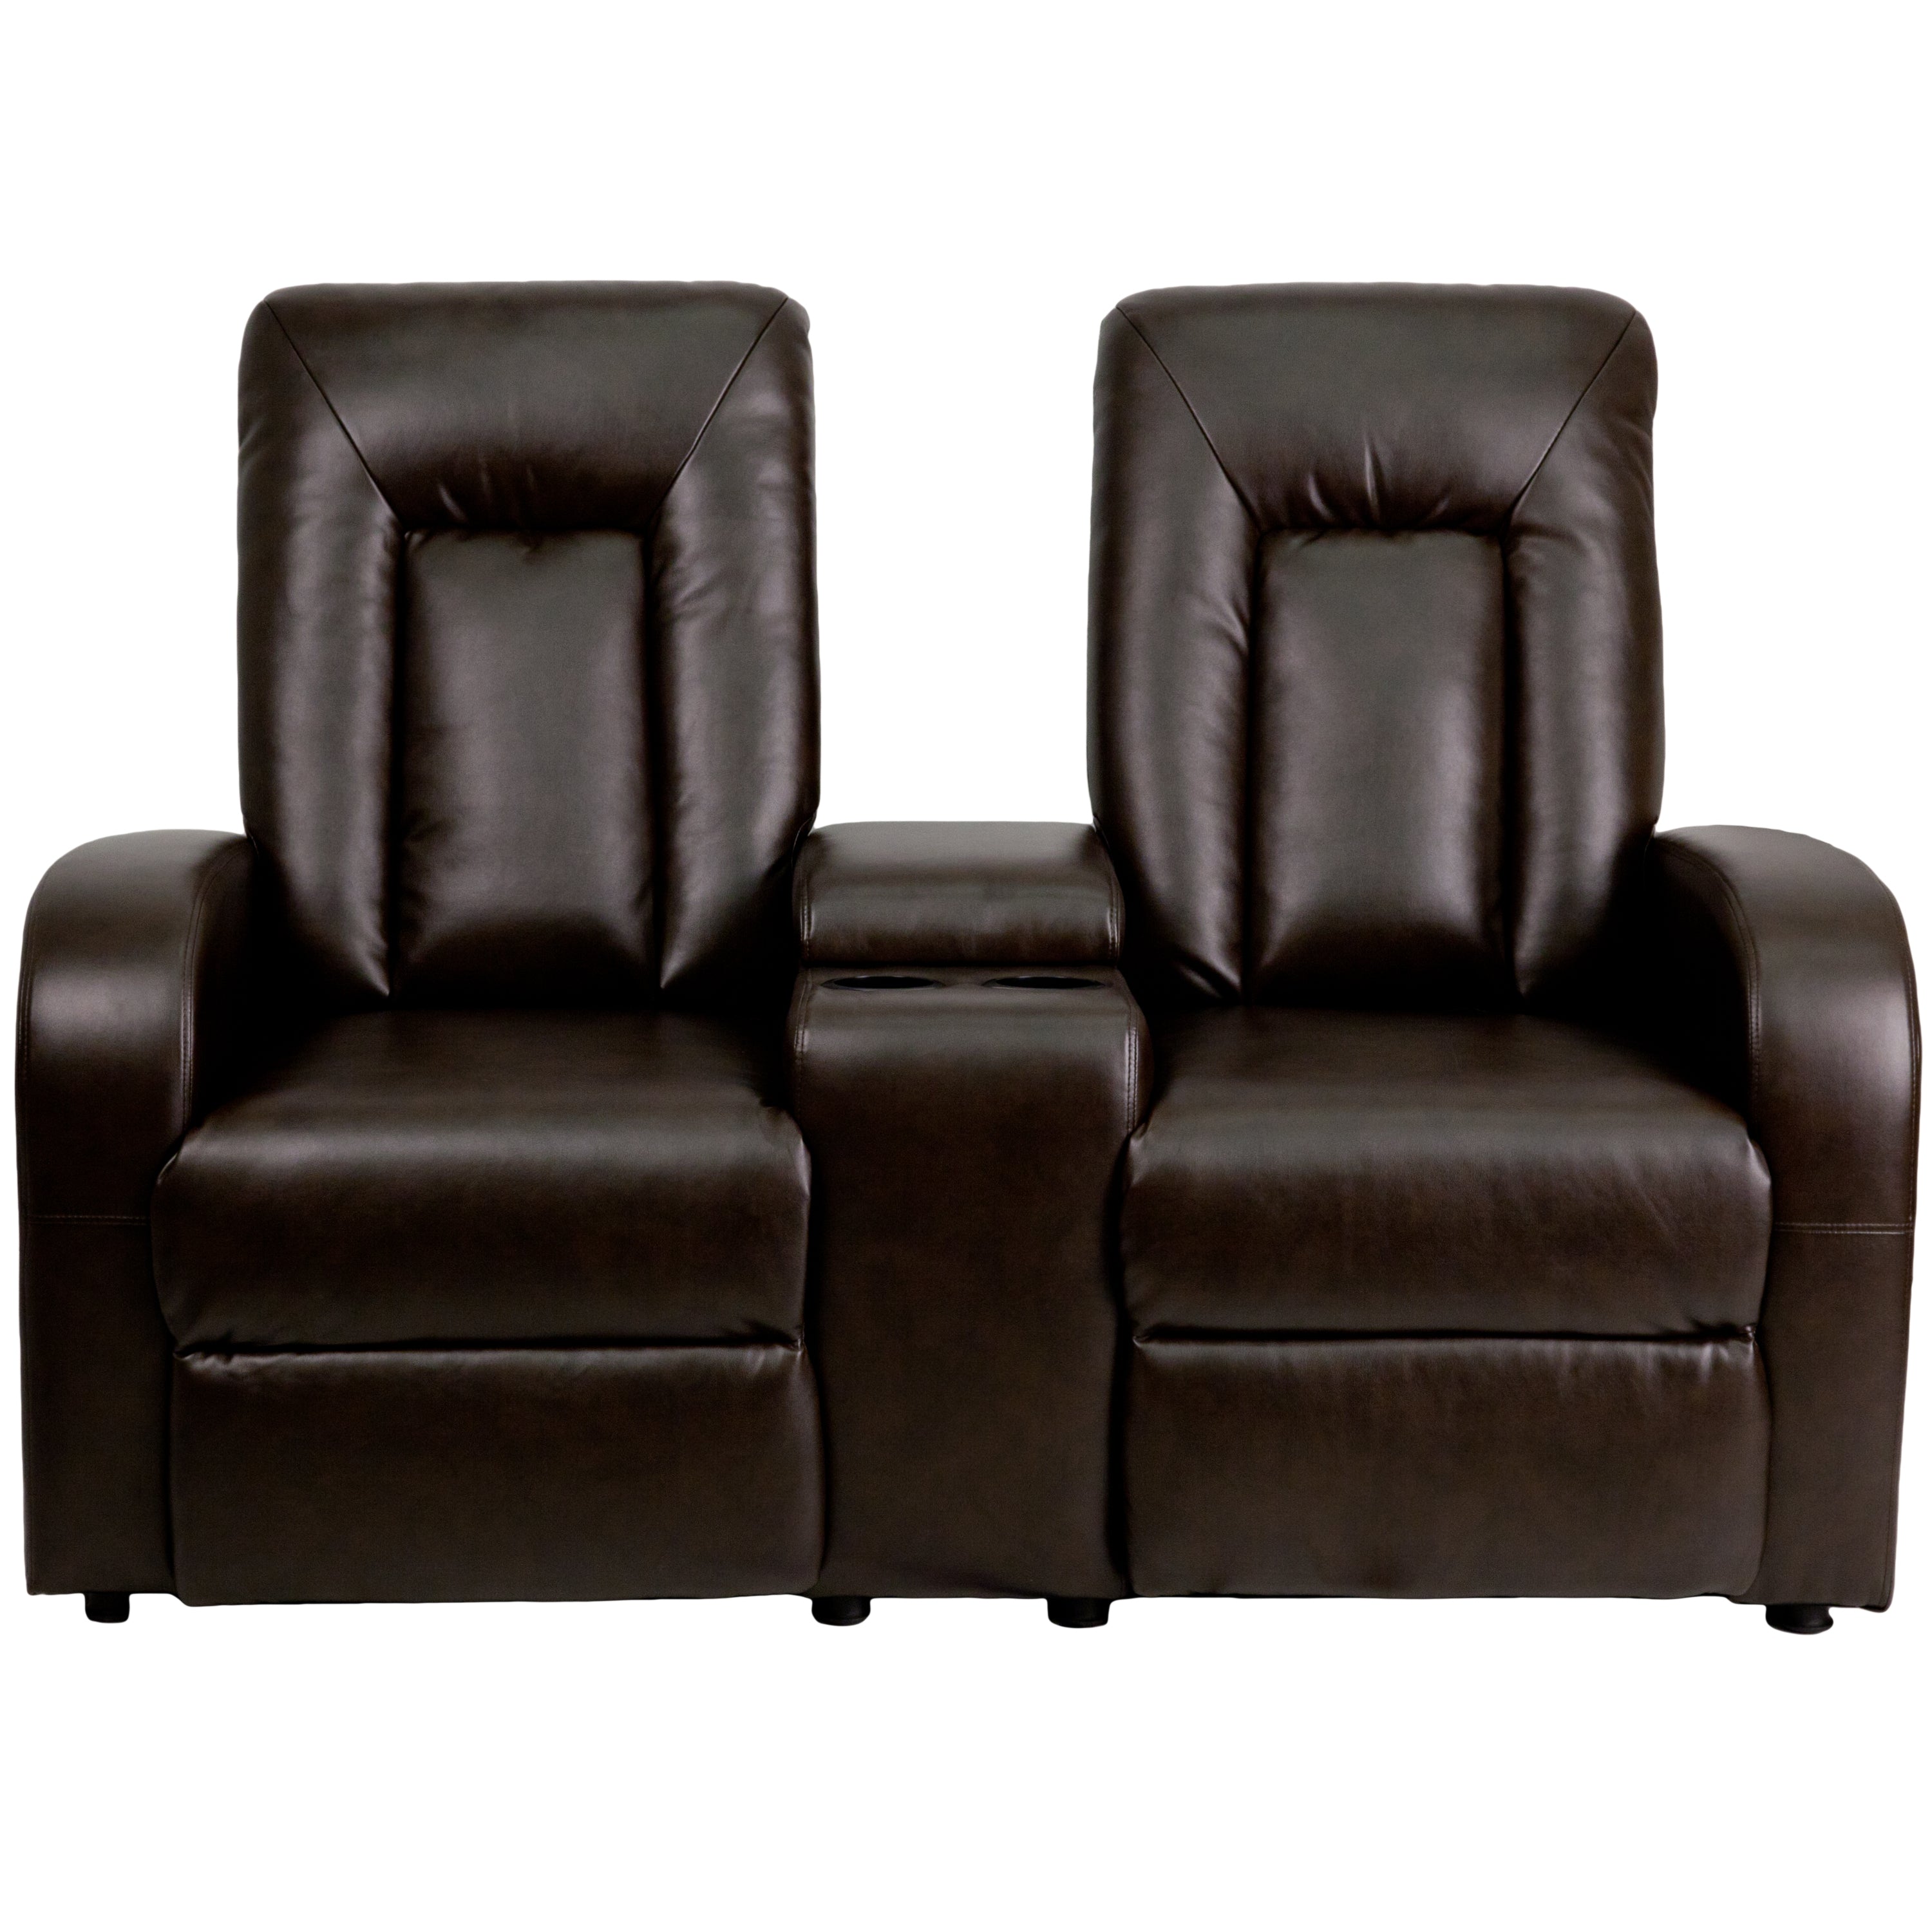 Eclipse Series 2-Seat Push Button Motorized Reclining LeatherSoft Theater Seating Unit with Cup Holders-Theater Seating-Flash Furniture-Wall2Wall Furnishings